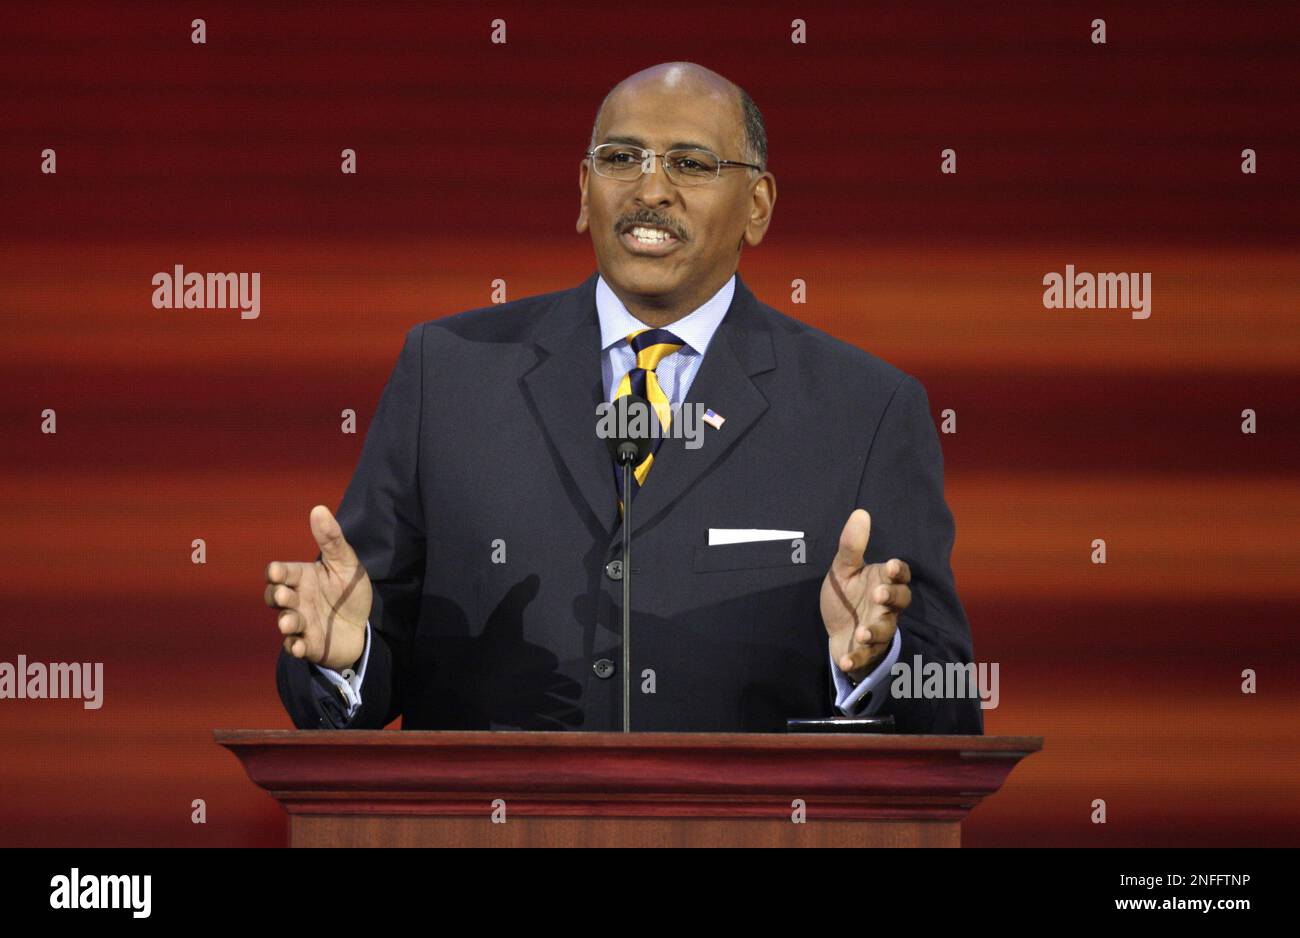 Michael Steele speaks at the Republican National Convention in St. Paul, Minn., Wednesday, Sept. 3, 2008. (AP Photo/Ron Edmonds) Stock Photo